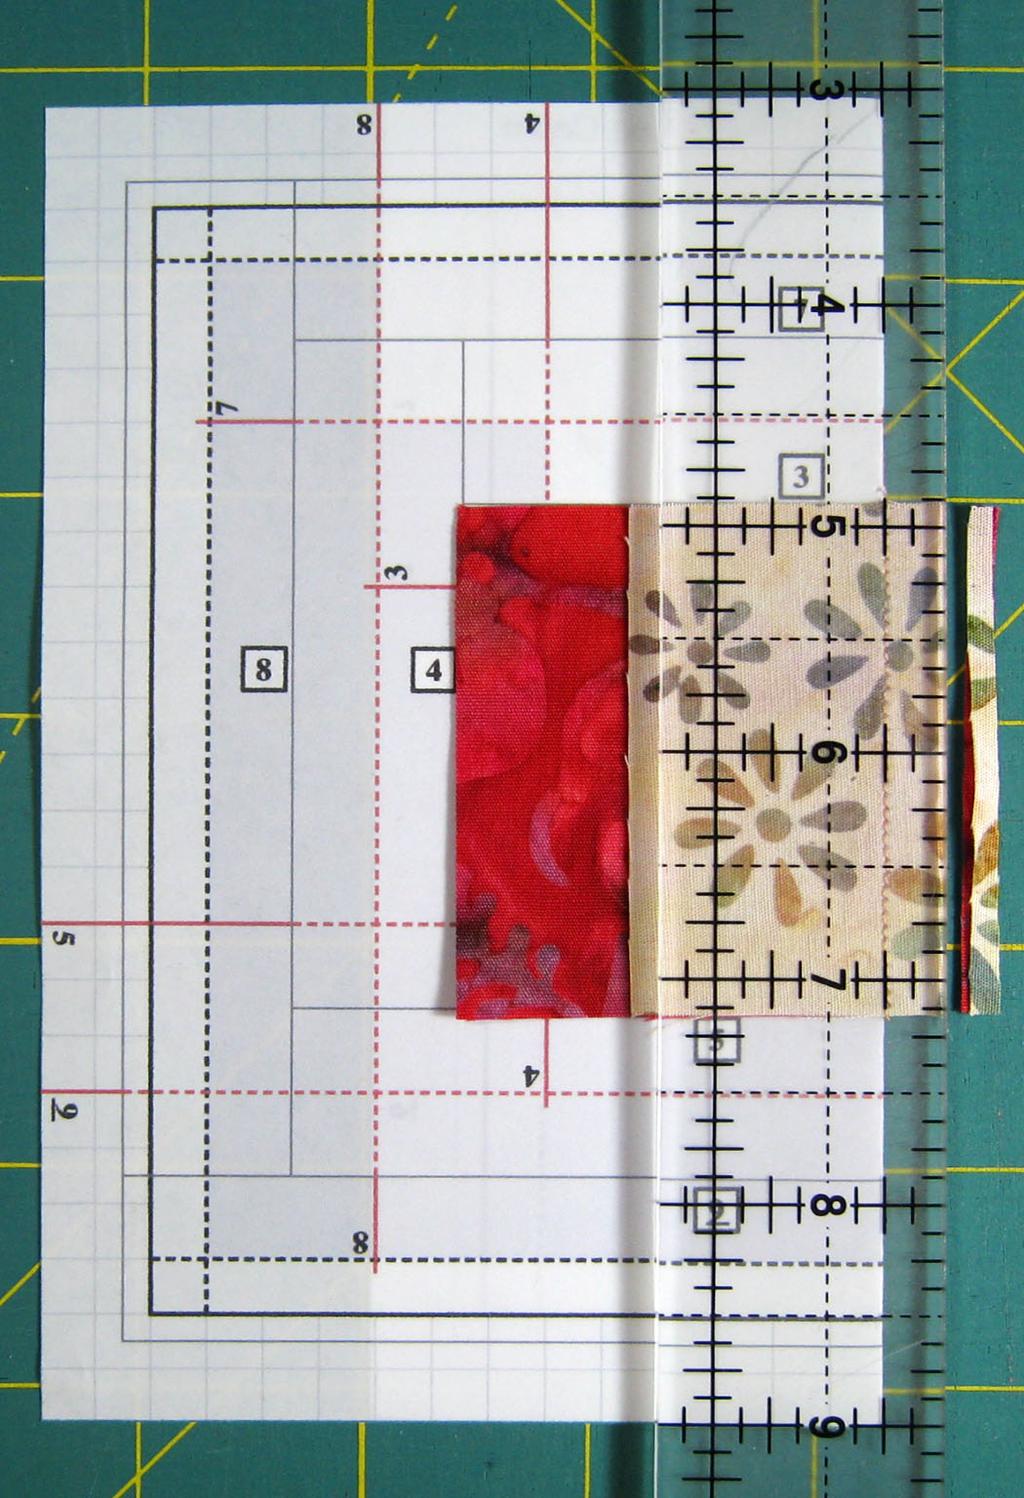 until pieces #1 and # are sewn on all blocks.